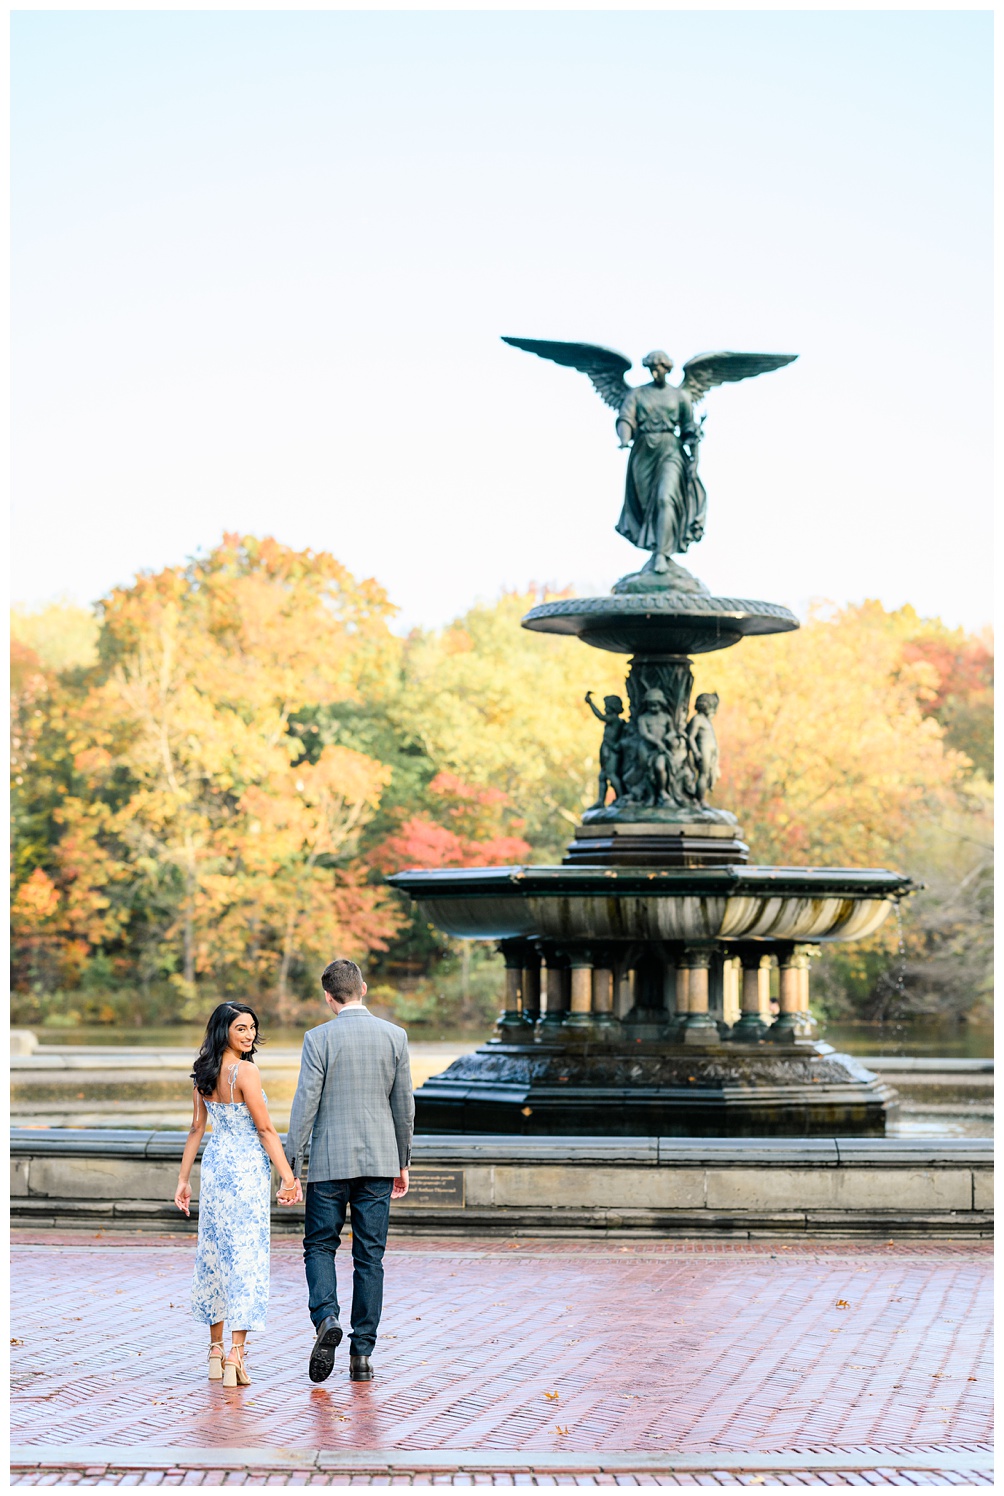 Most Iconic places for engagement photos in New York's Central Park